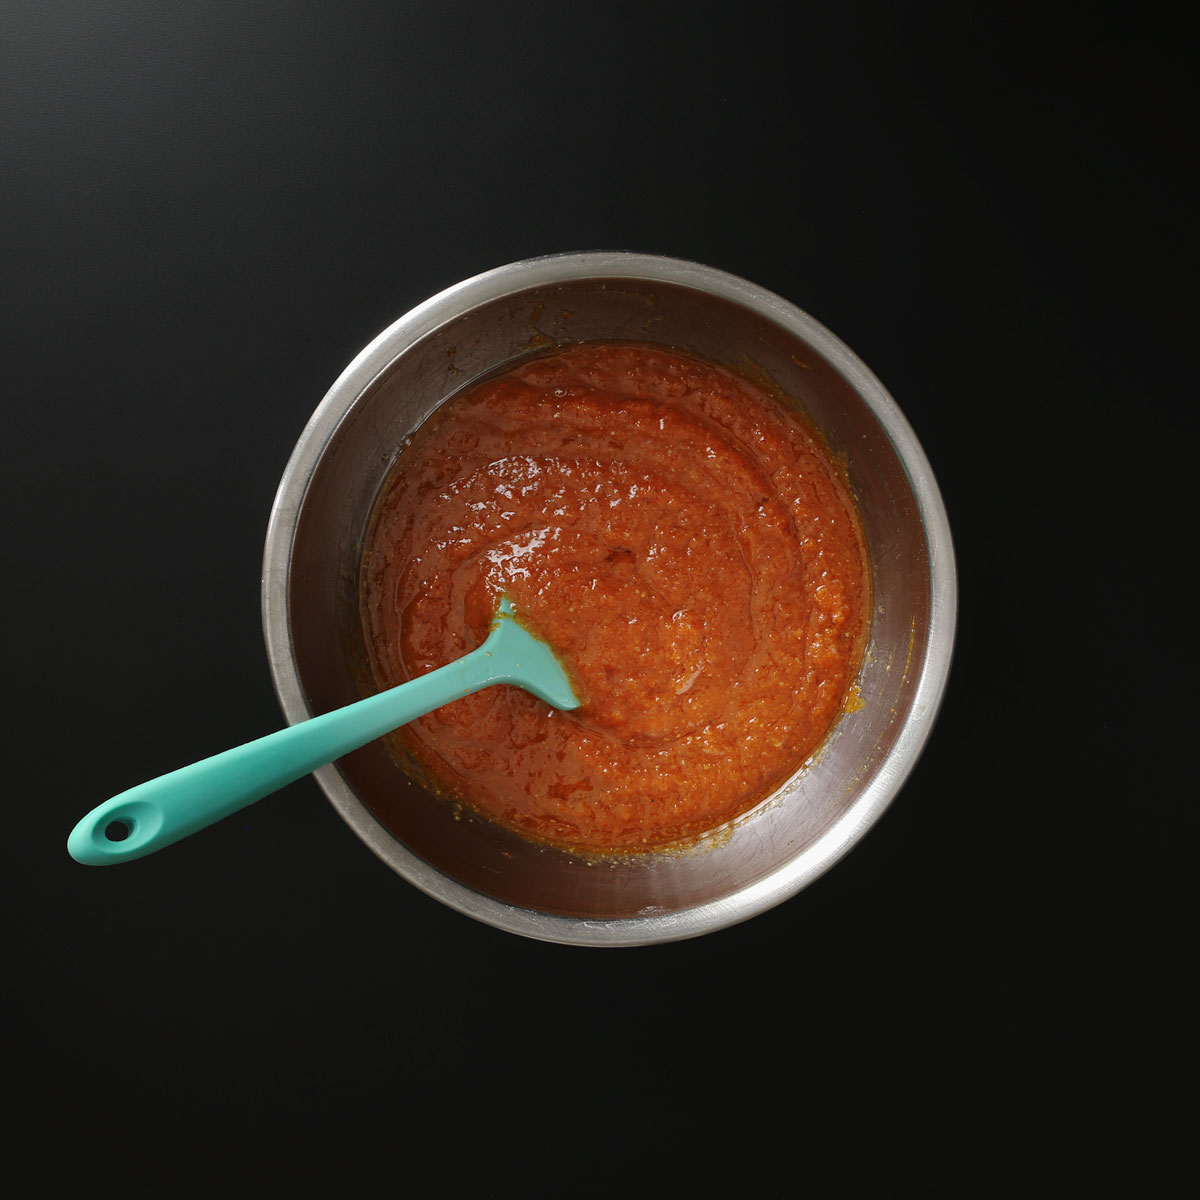 teal spatula immersed in pumpkin mixture in large mixing bowl.